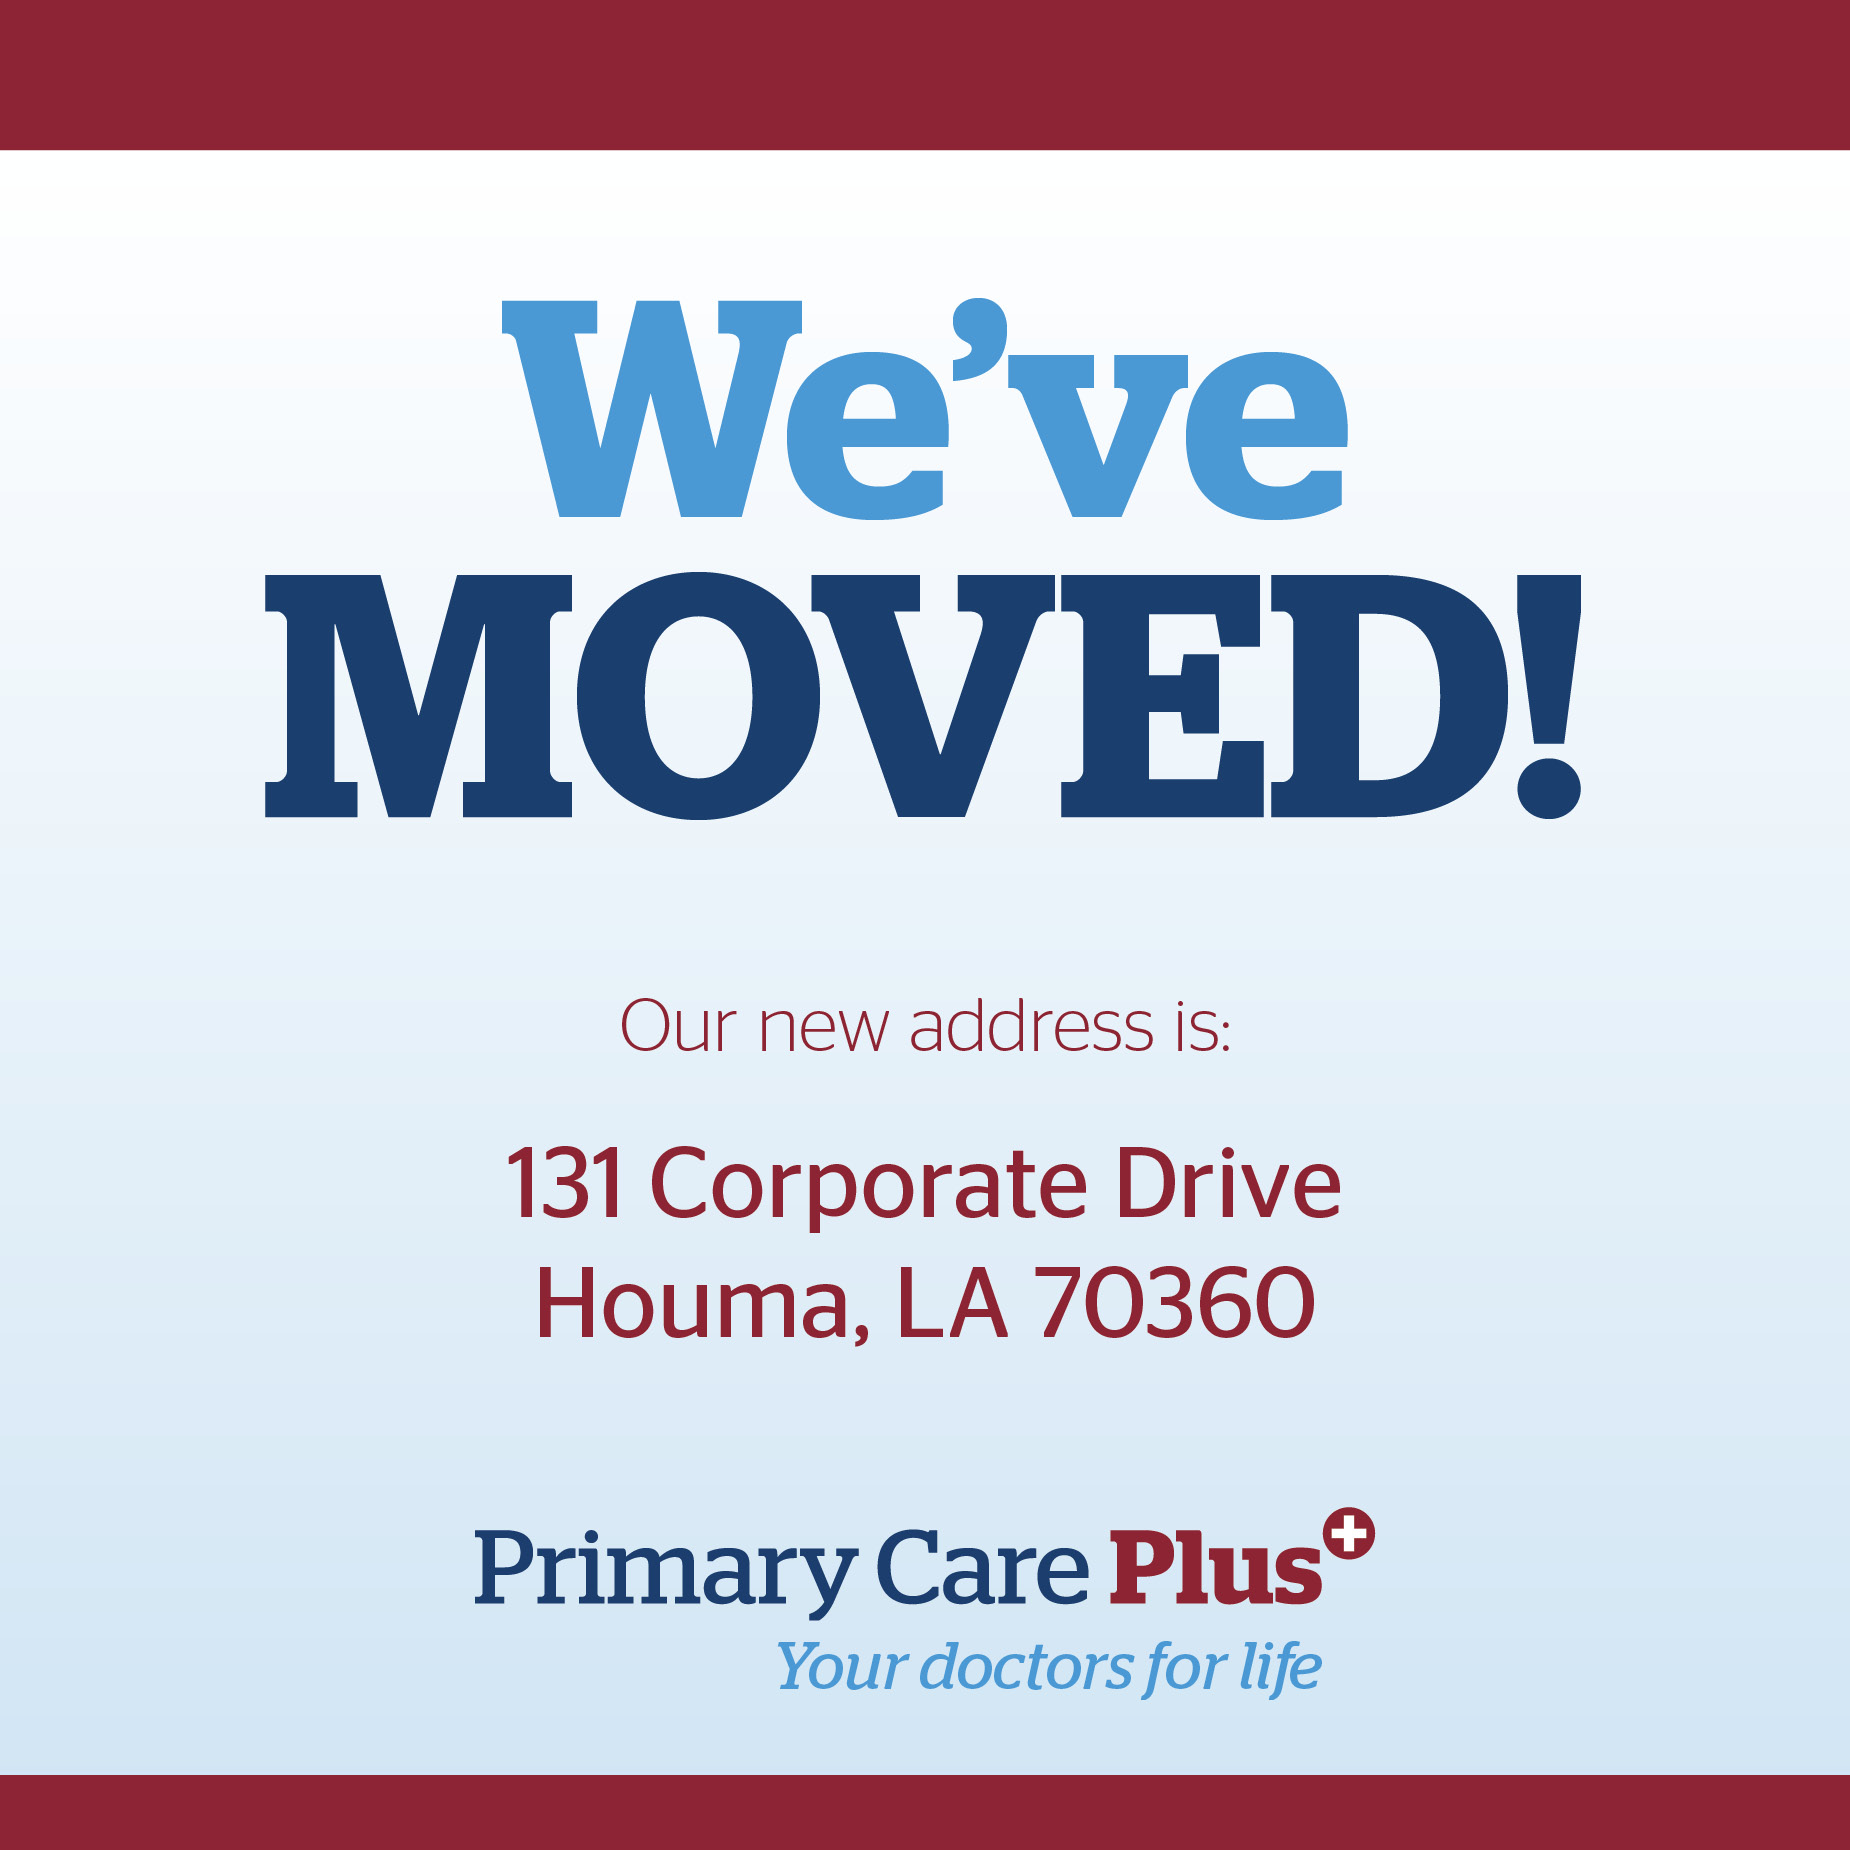 We've moved: our new address is 131 Corporate Drive, Houma, LA 70360